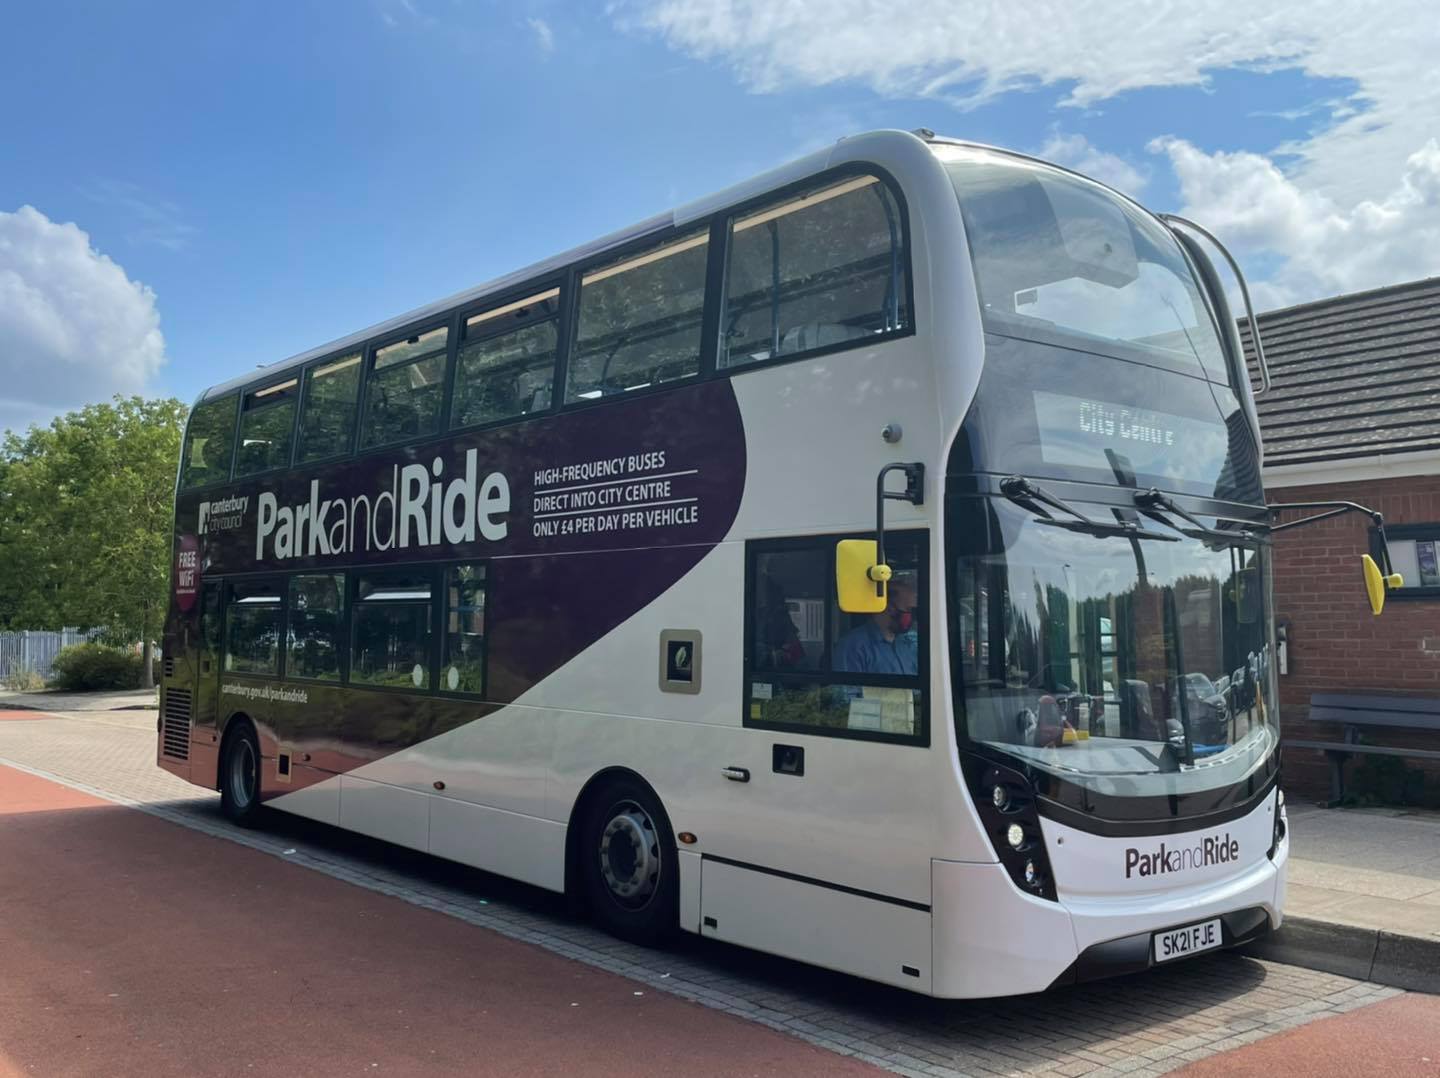 Park and ride bus at New Dover Road